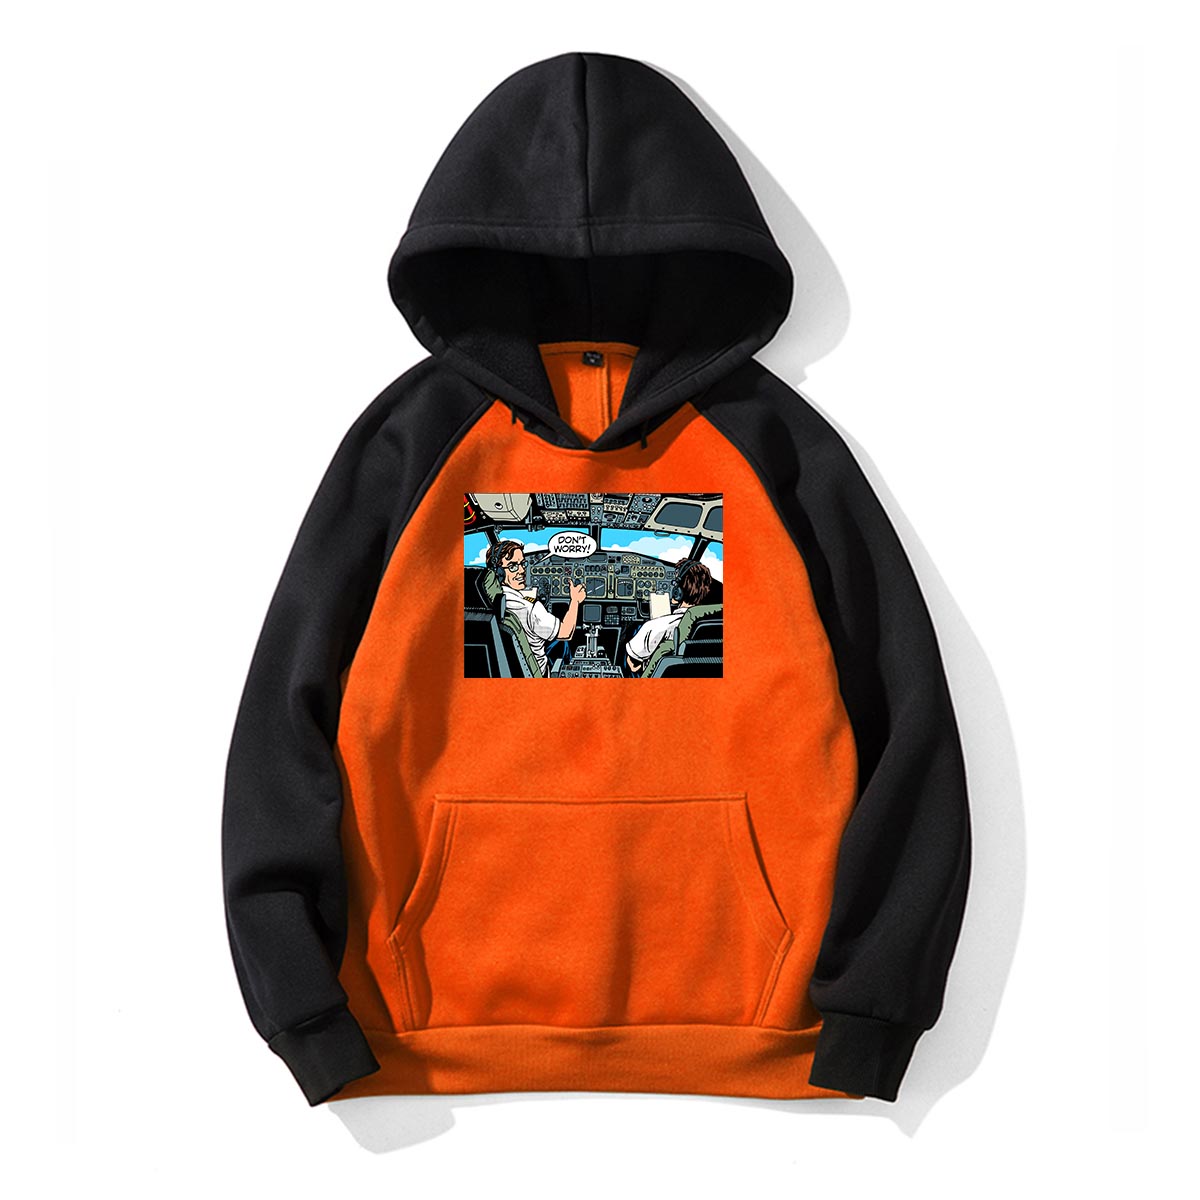 Don't Worry Thumb Up Captain Designed Colourful Hoodies